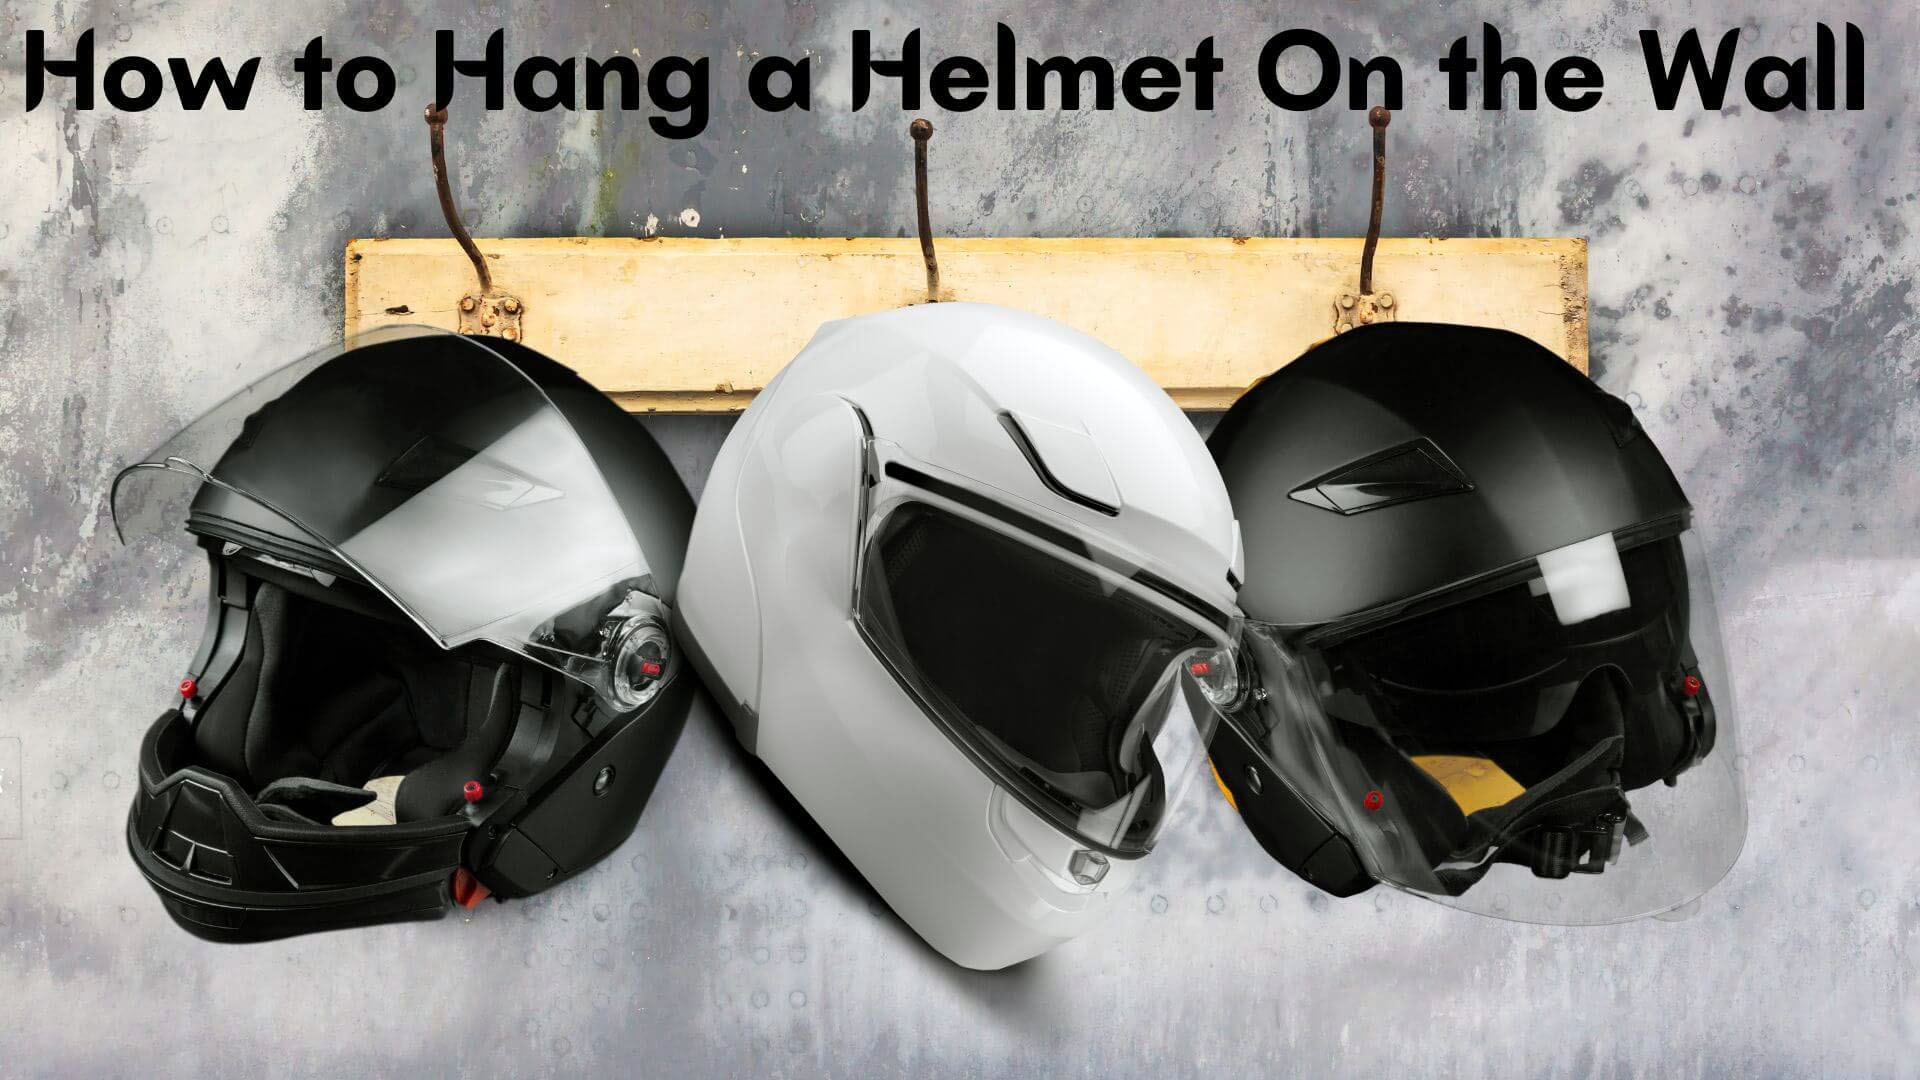 How to Hang a Helmet On the Wall